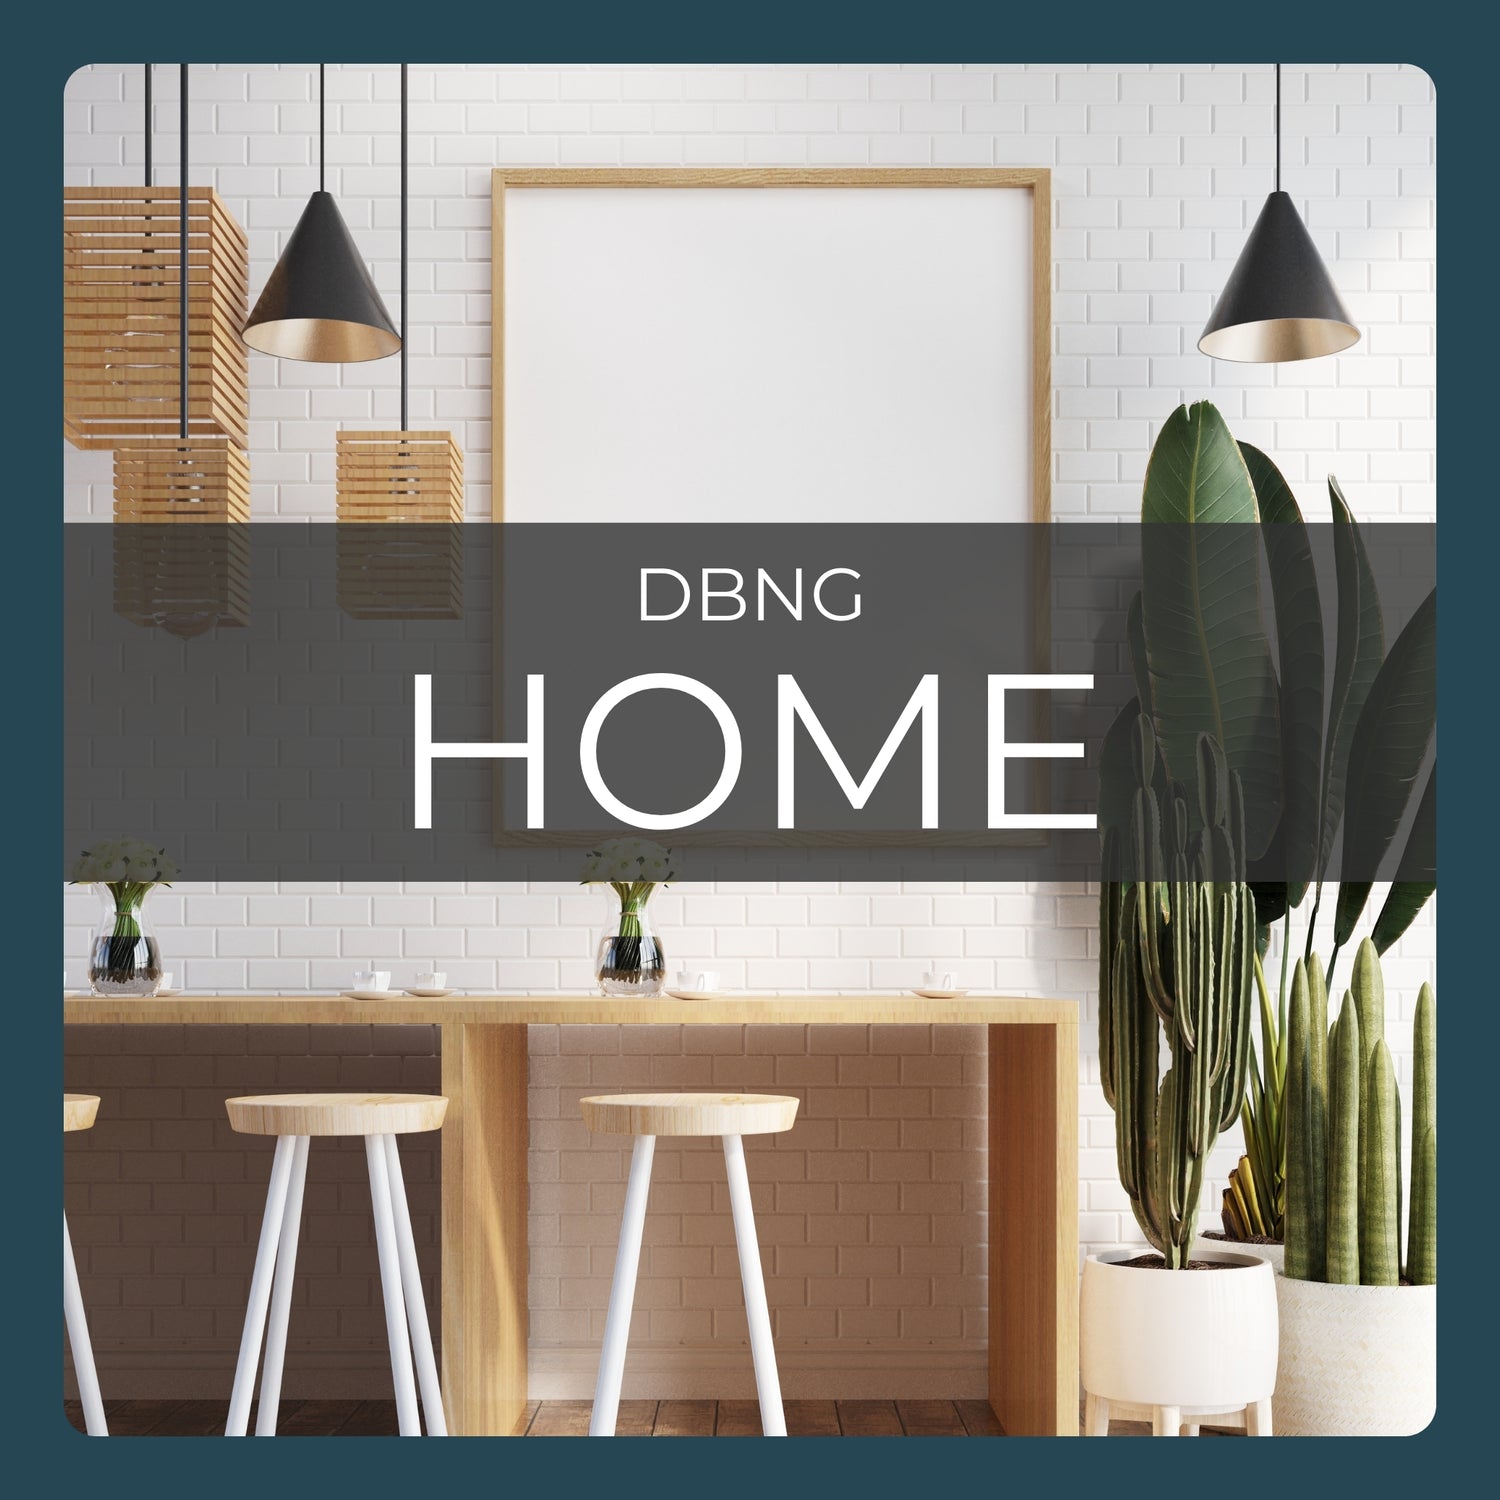 DBNG Home